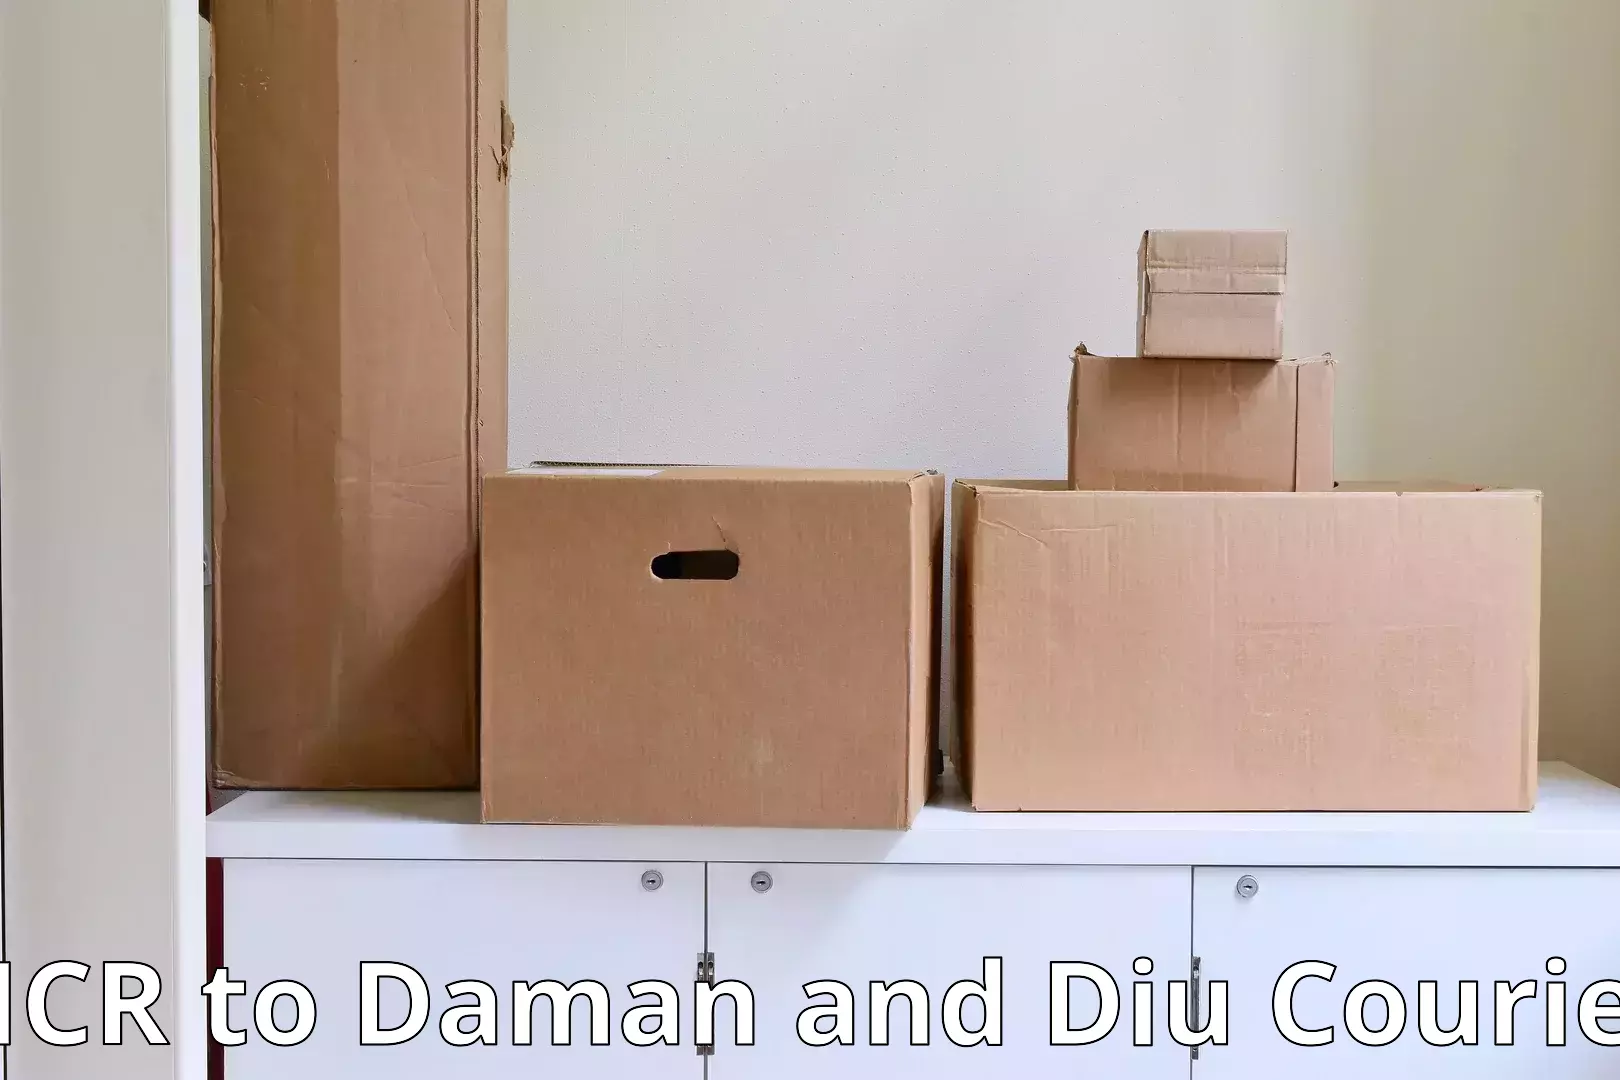 Household goods transport service NCR to Daman and Diu